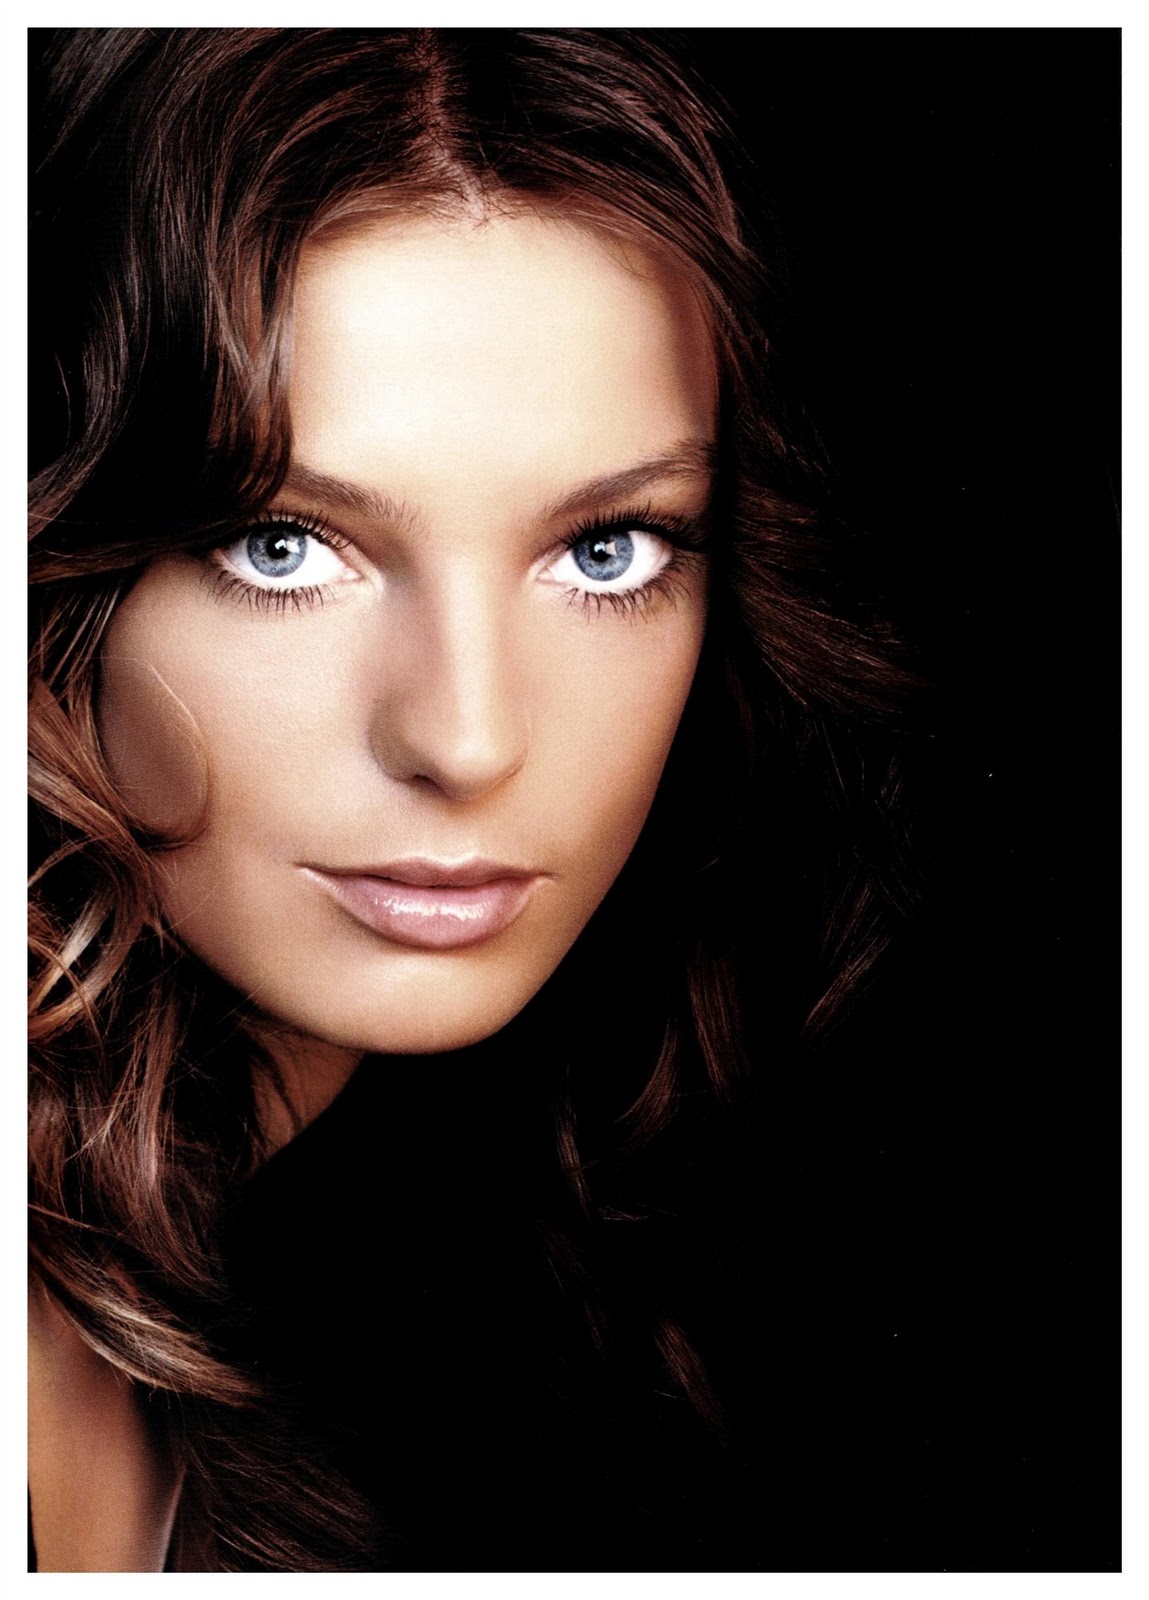 Daria Werbowy - Photo Colection